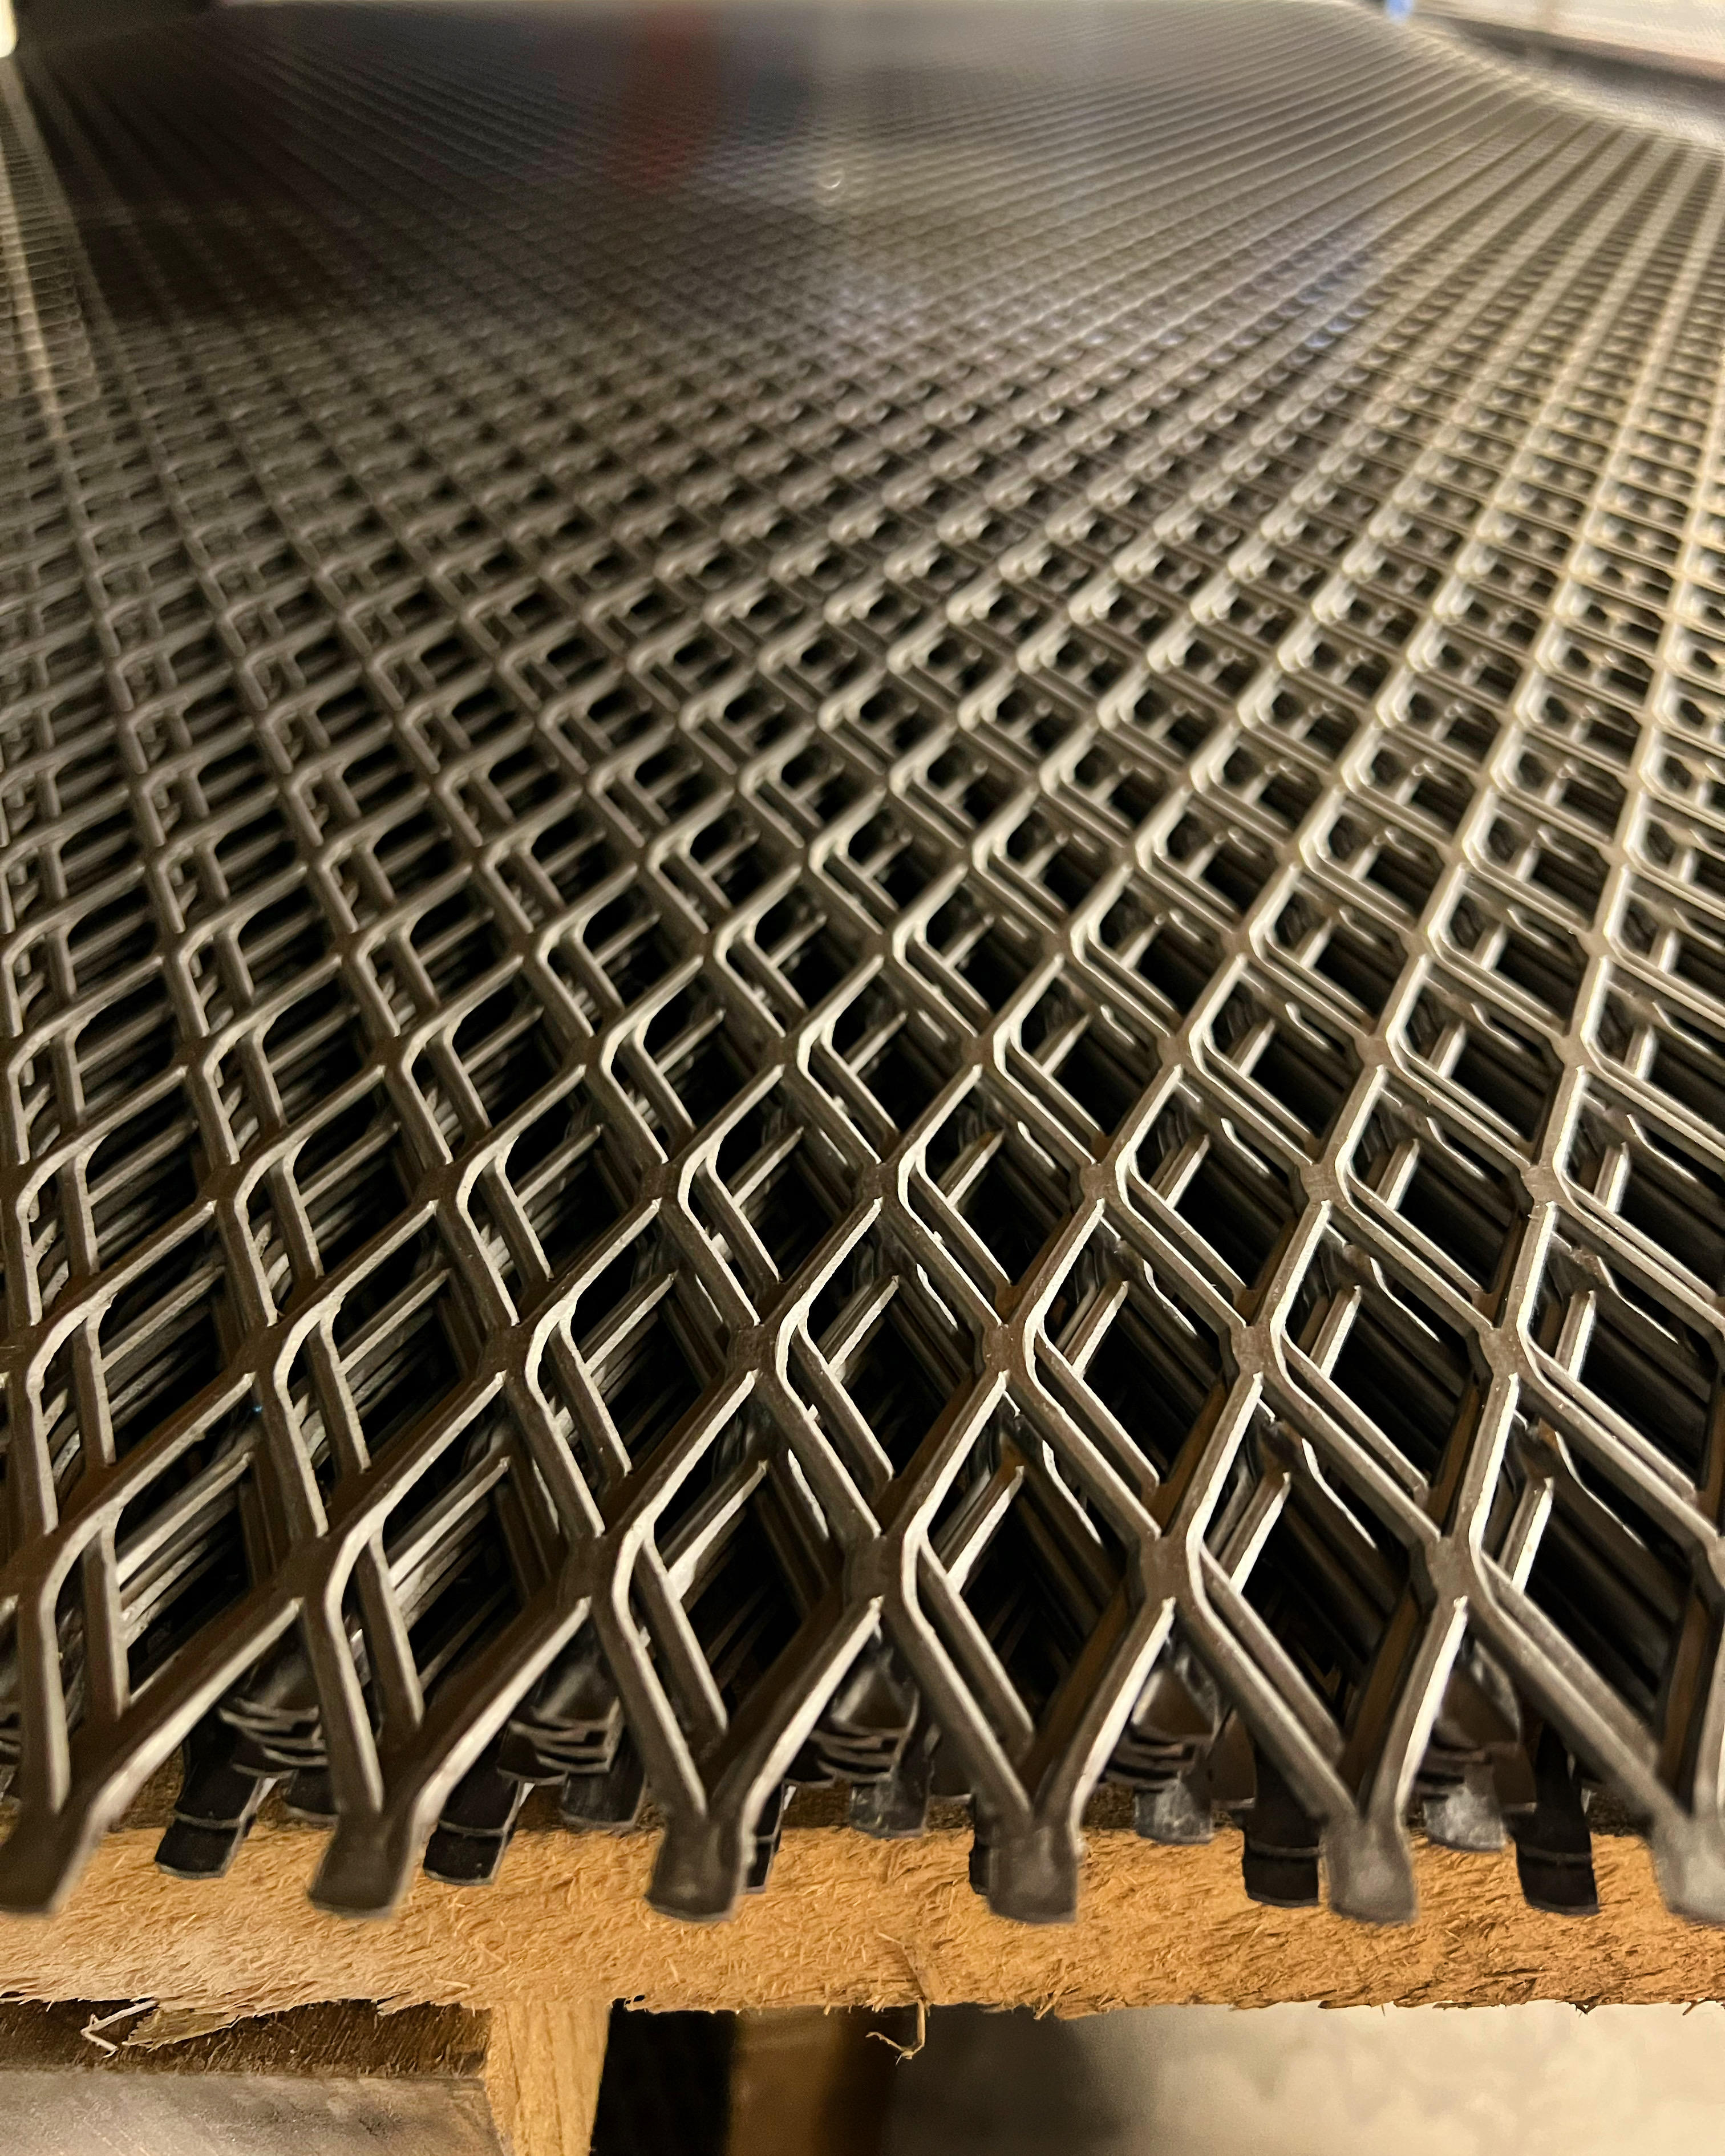 We carry both expanded and perforated metals.